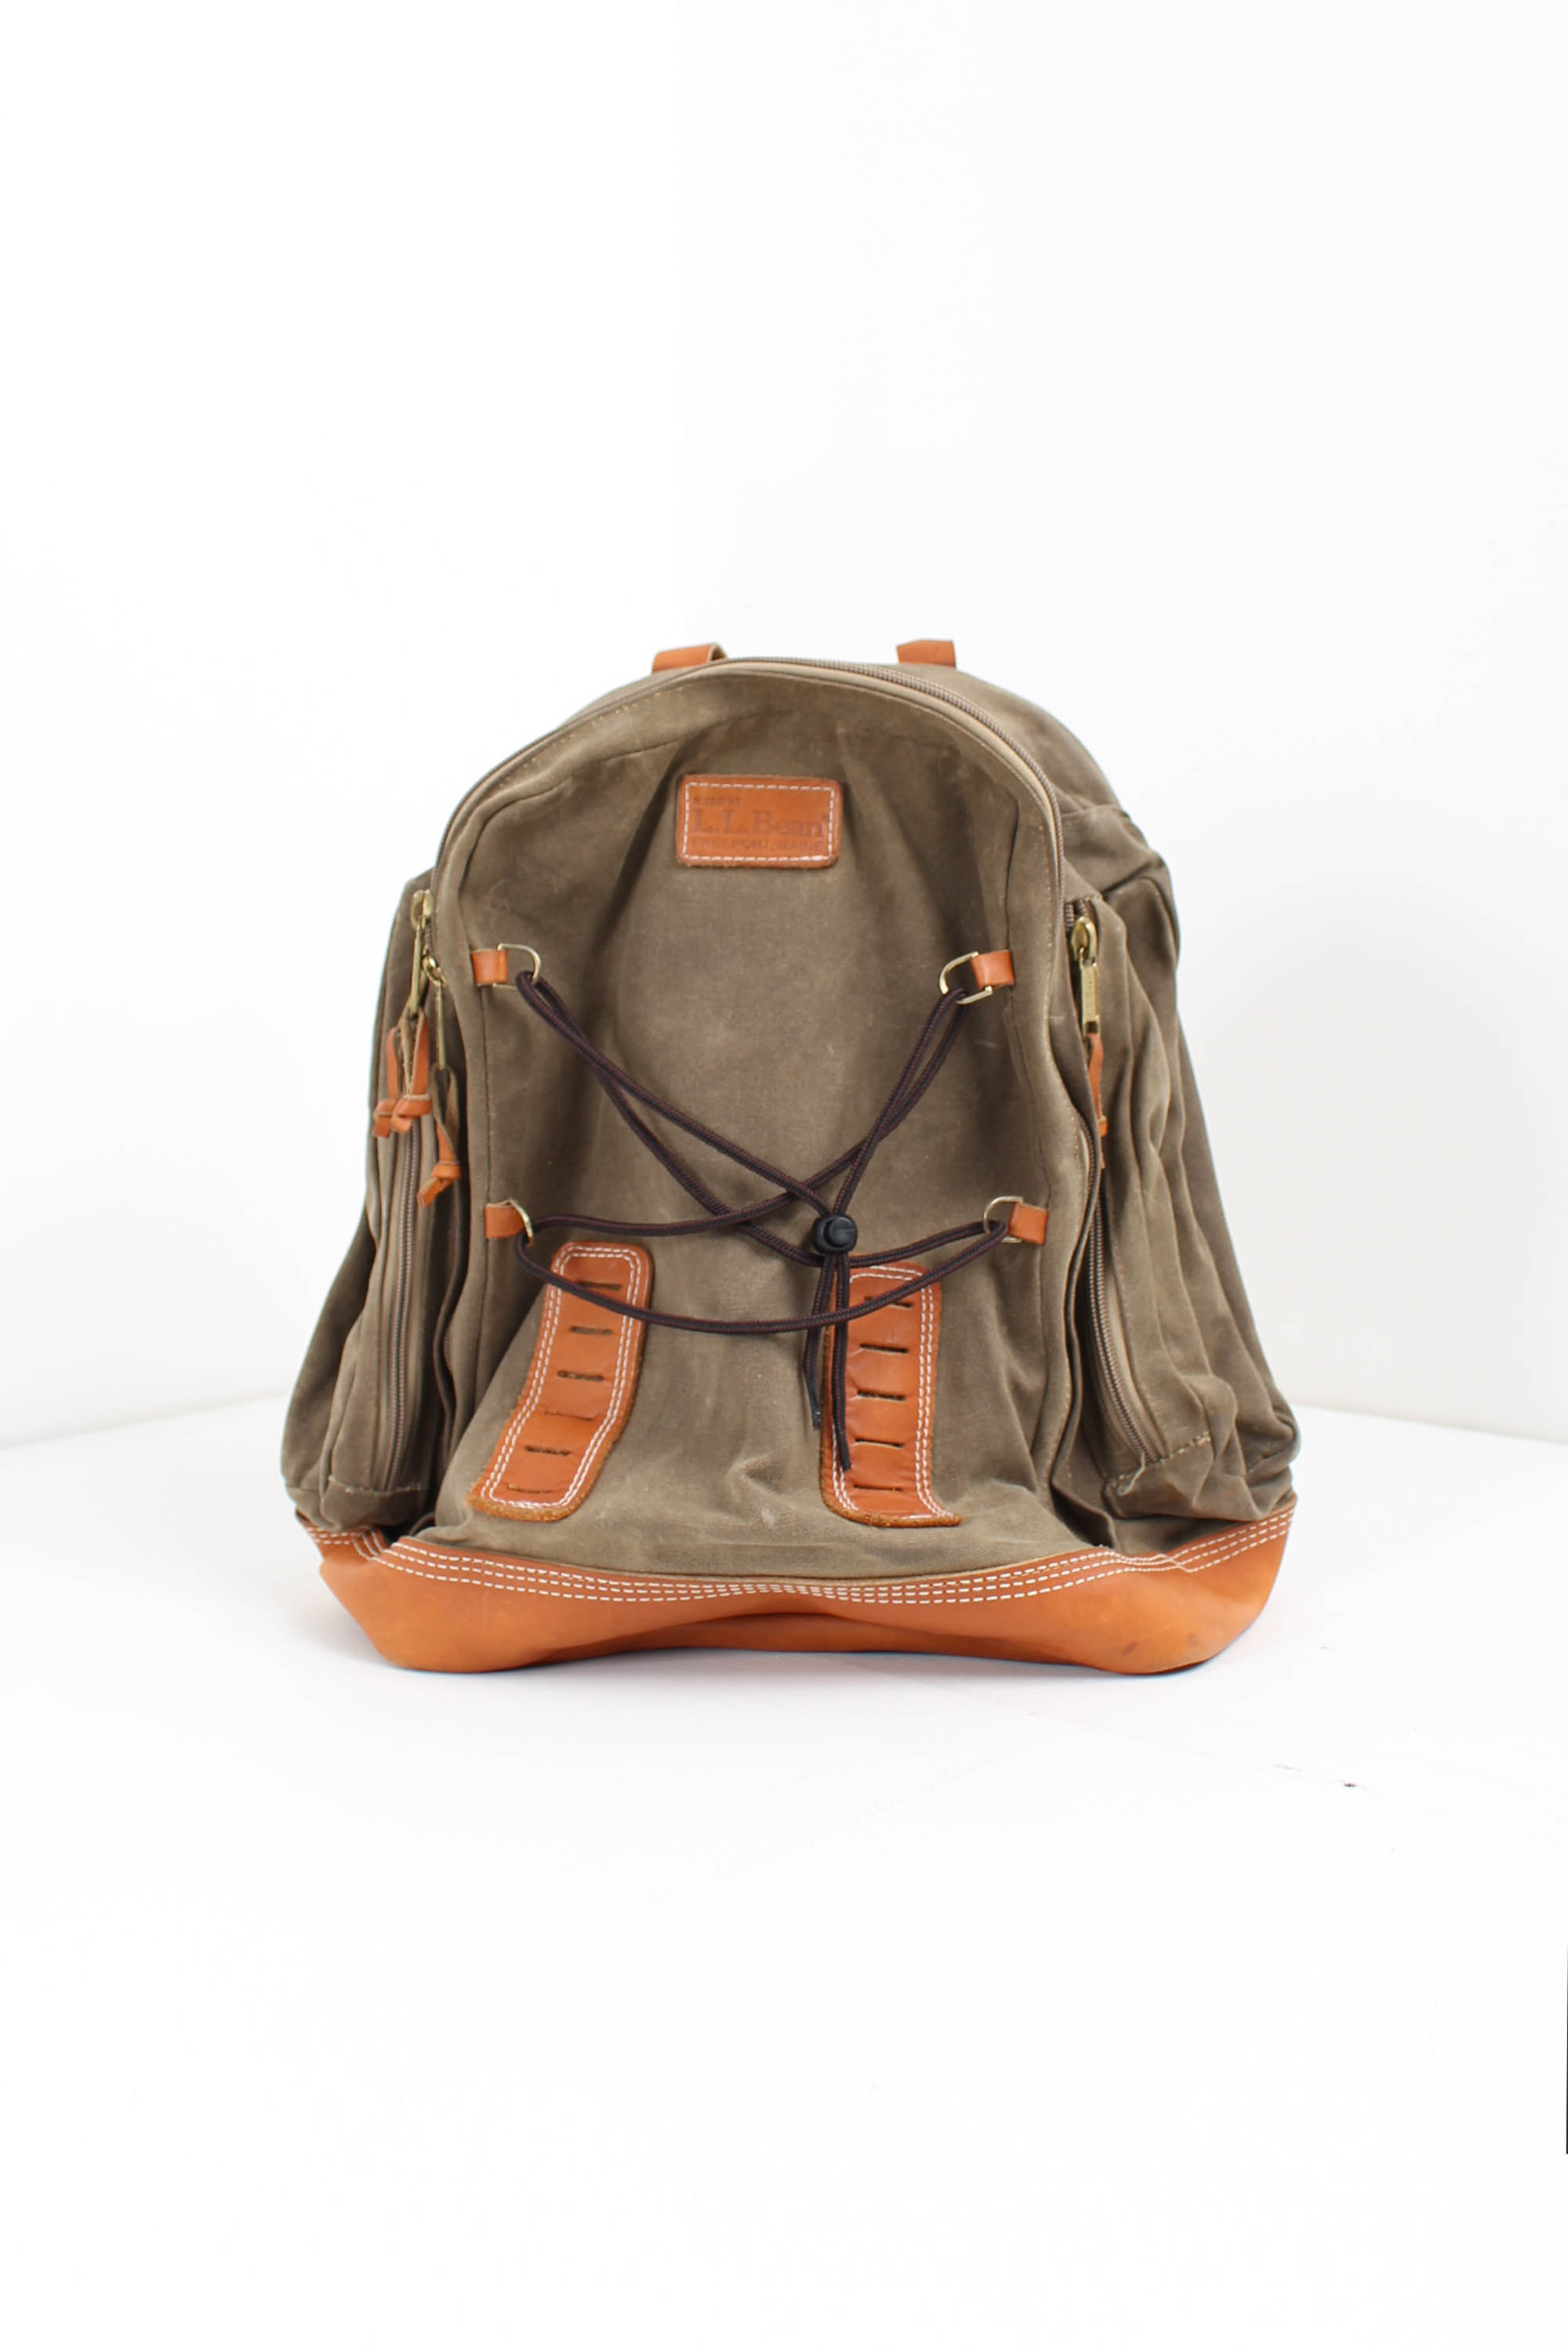 LL BEAN backpack(made in usa)